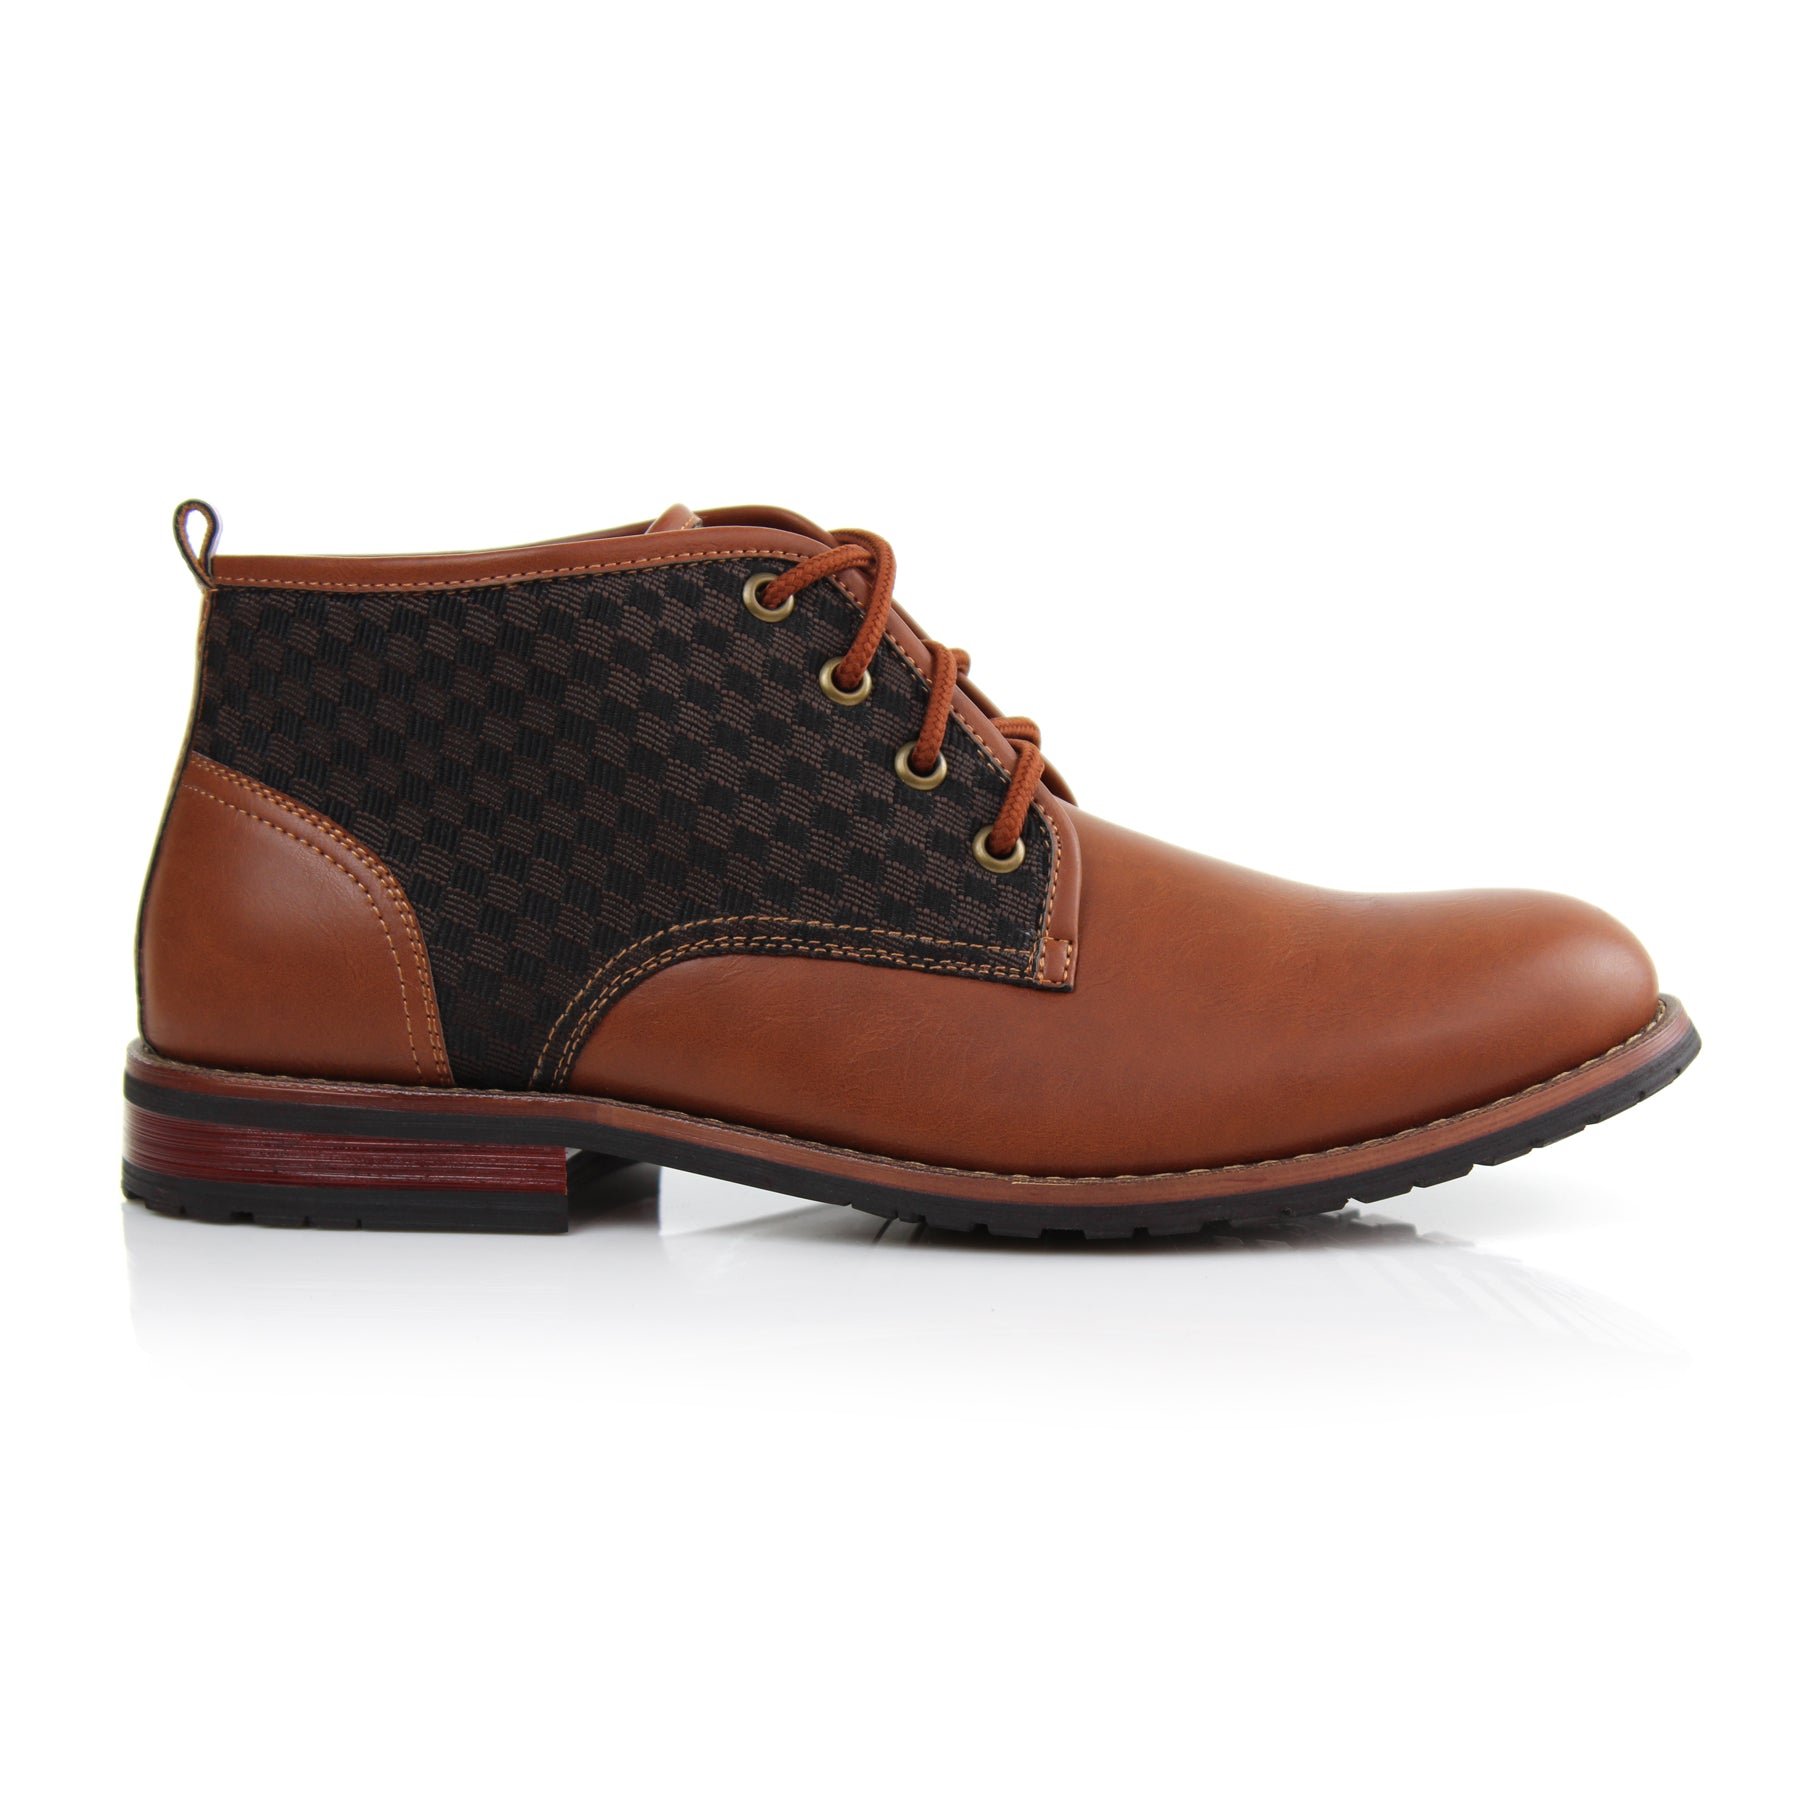 Plaid Contrast Chukka Boots | Ryan by Ferro Aldo | Conal Footwear | Outer Side Angle View